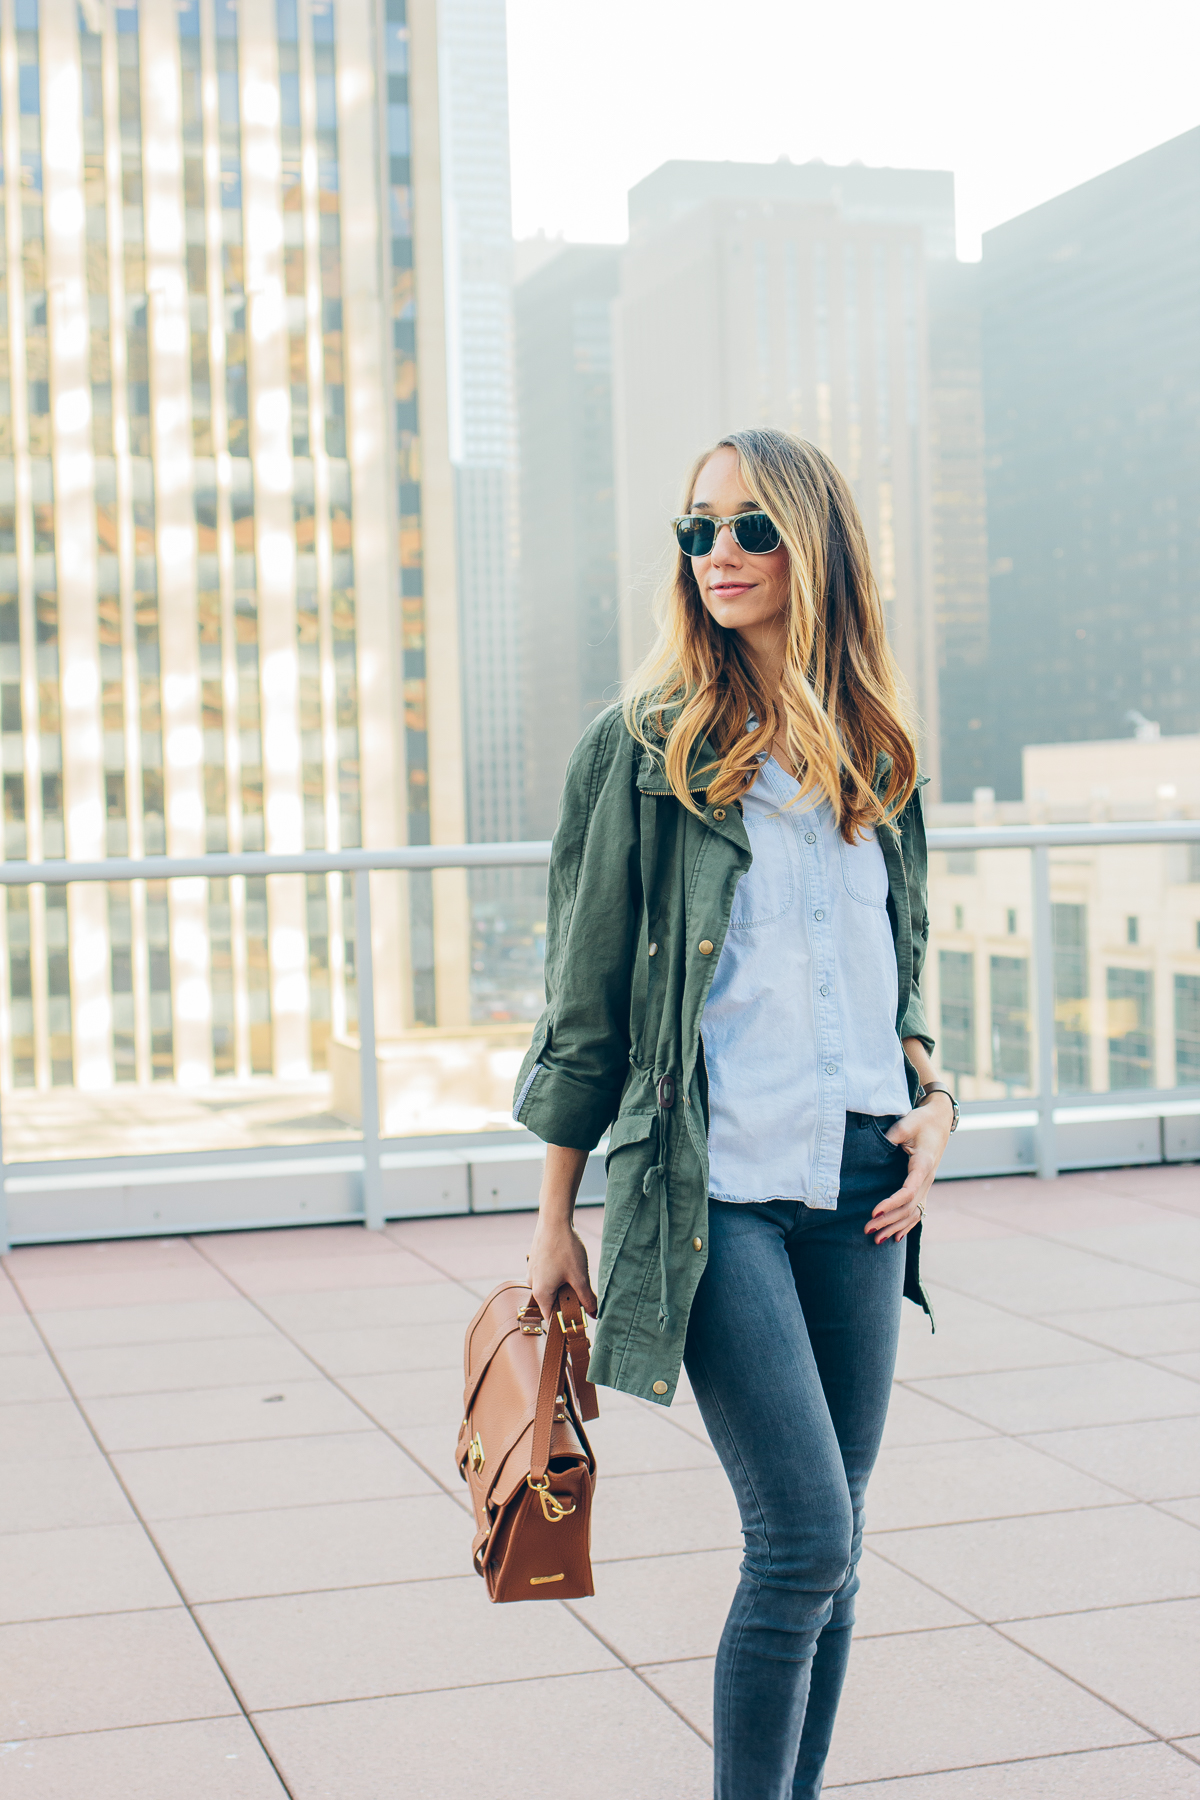 tassel sandals, military jacket, chambray, casual outfit — via @TheFoxandShe